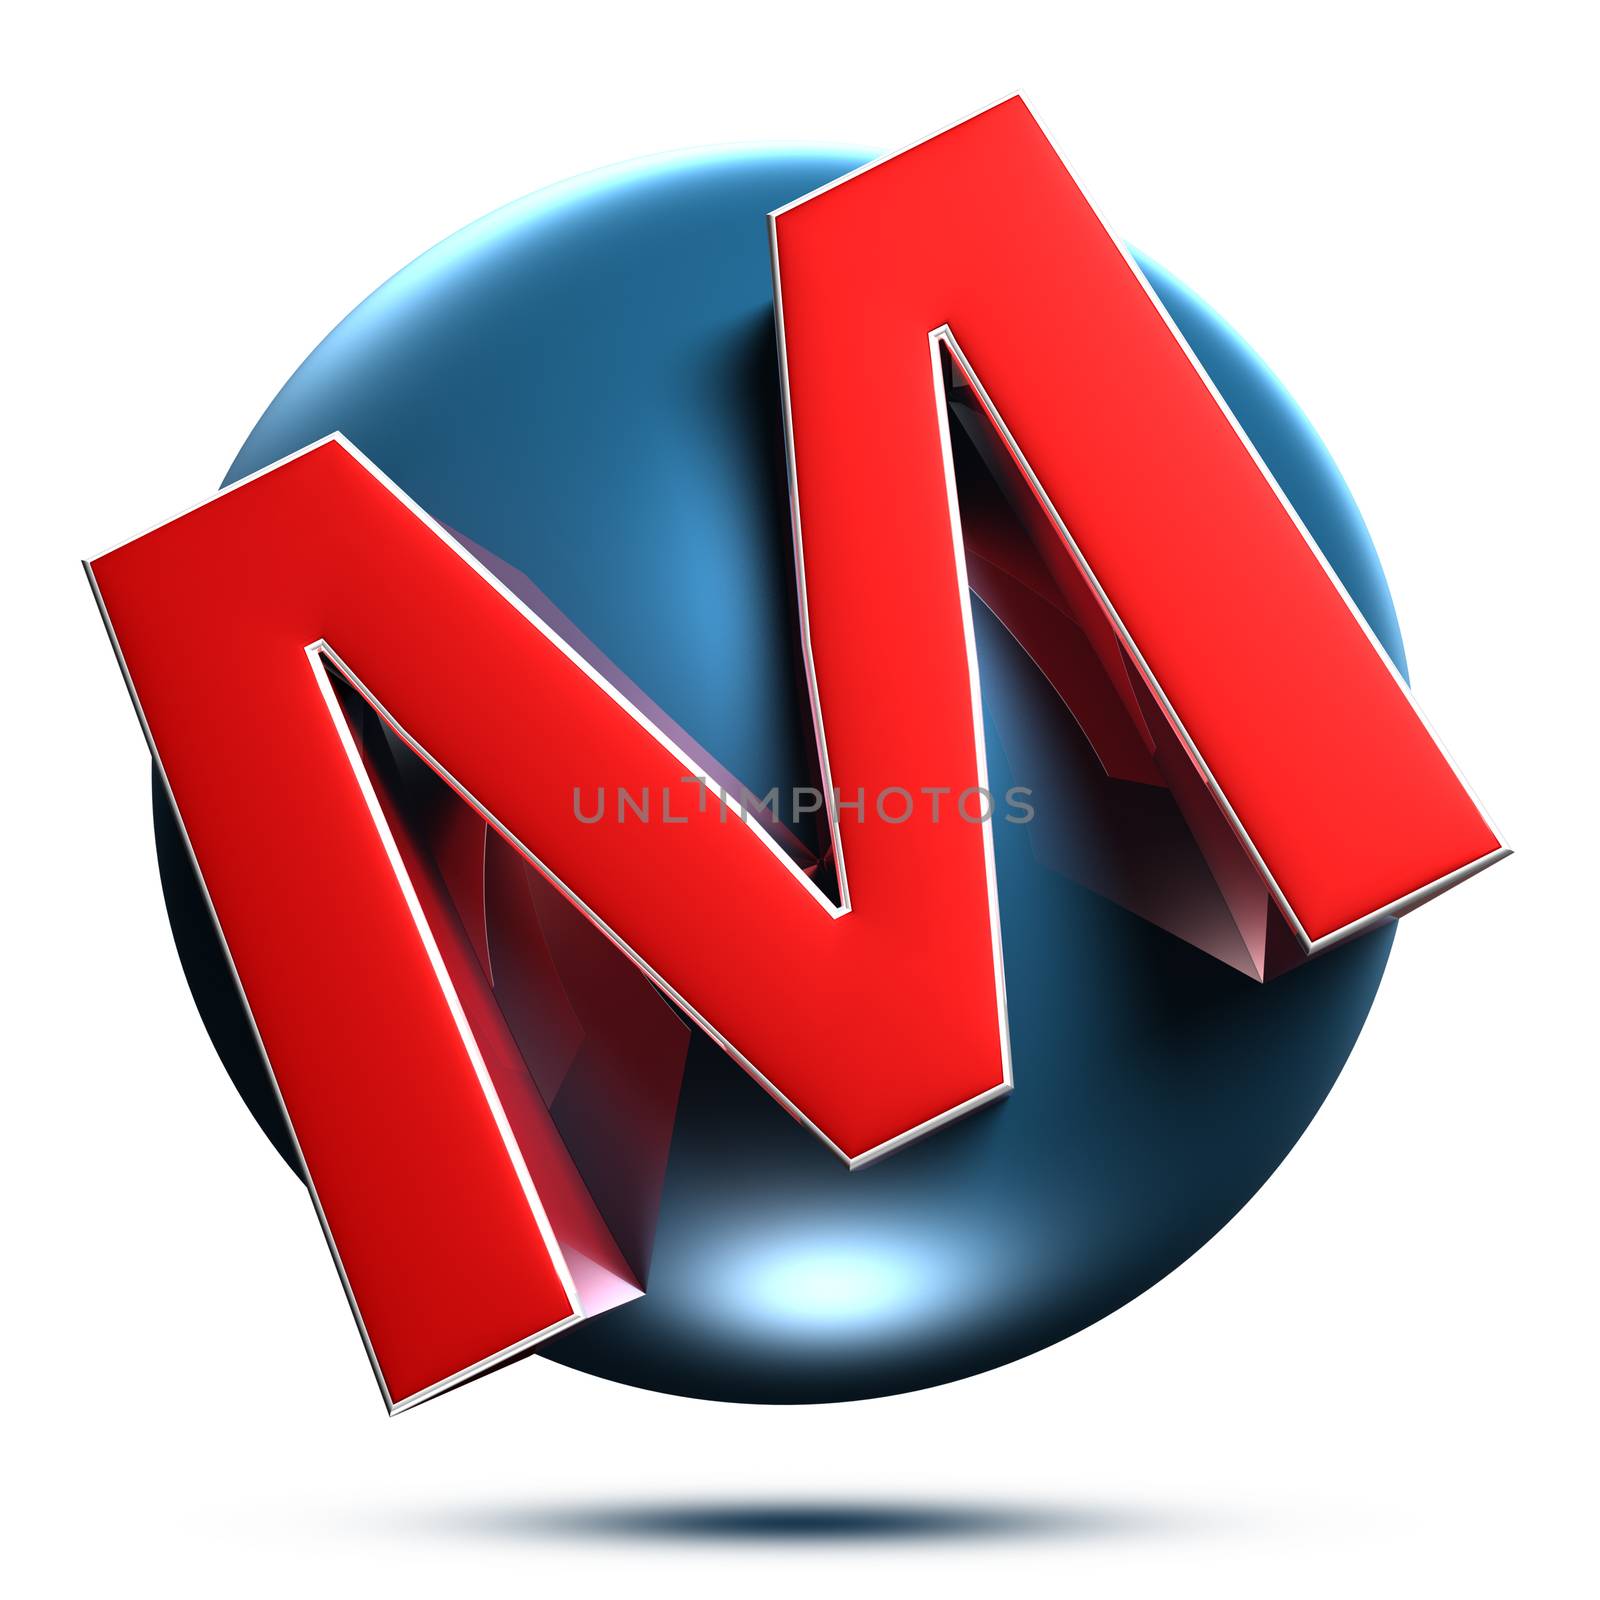 M logo isolated on white background illustration 3D rendering with clipping path.